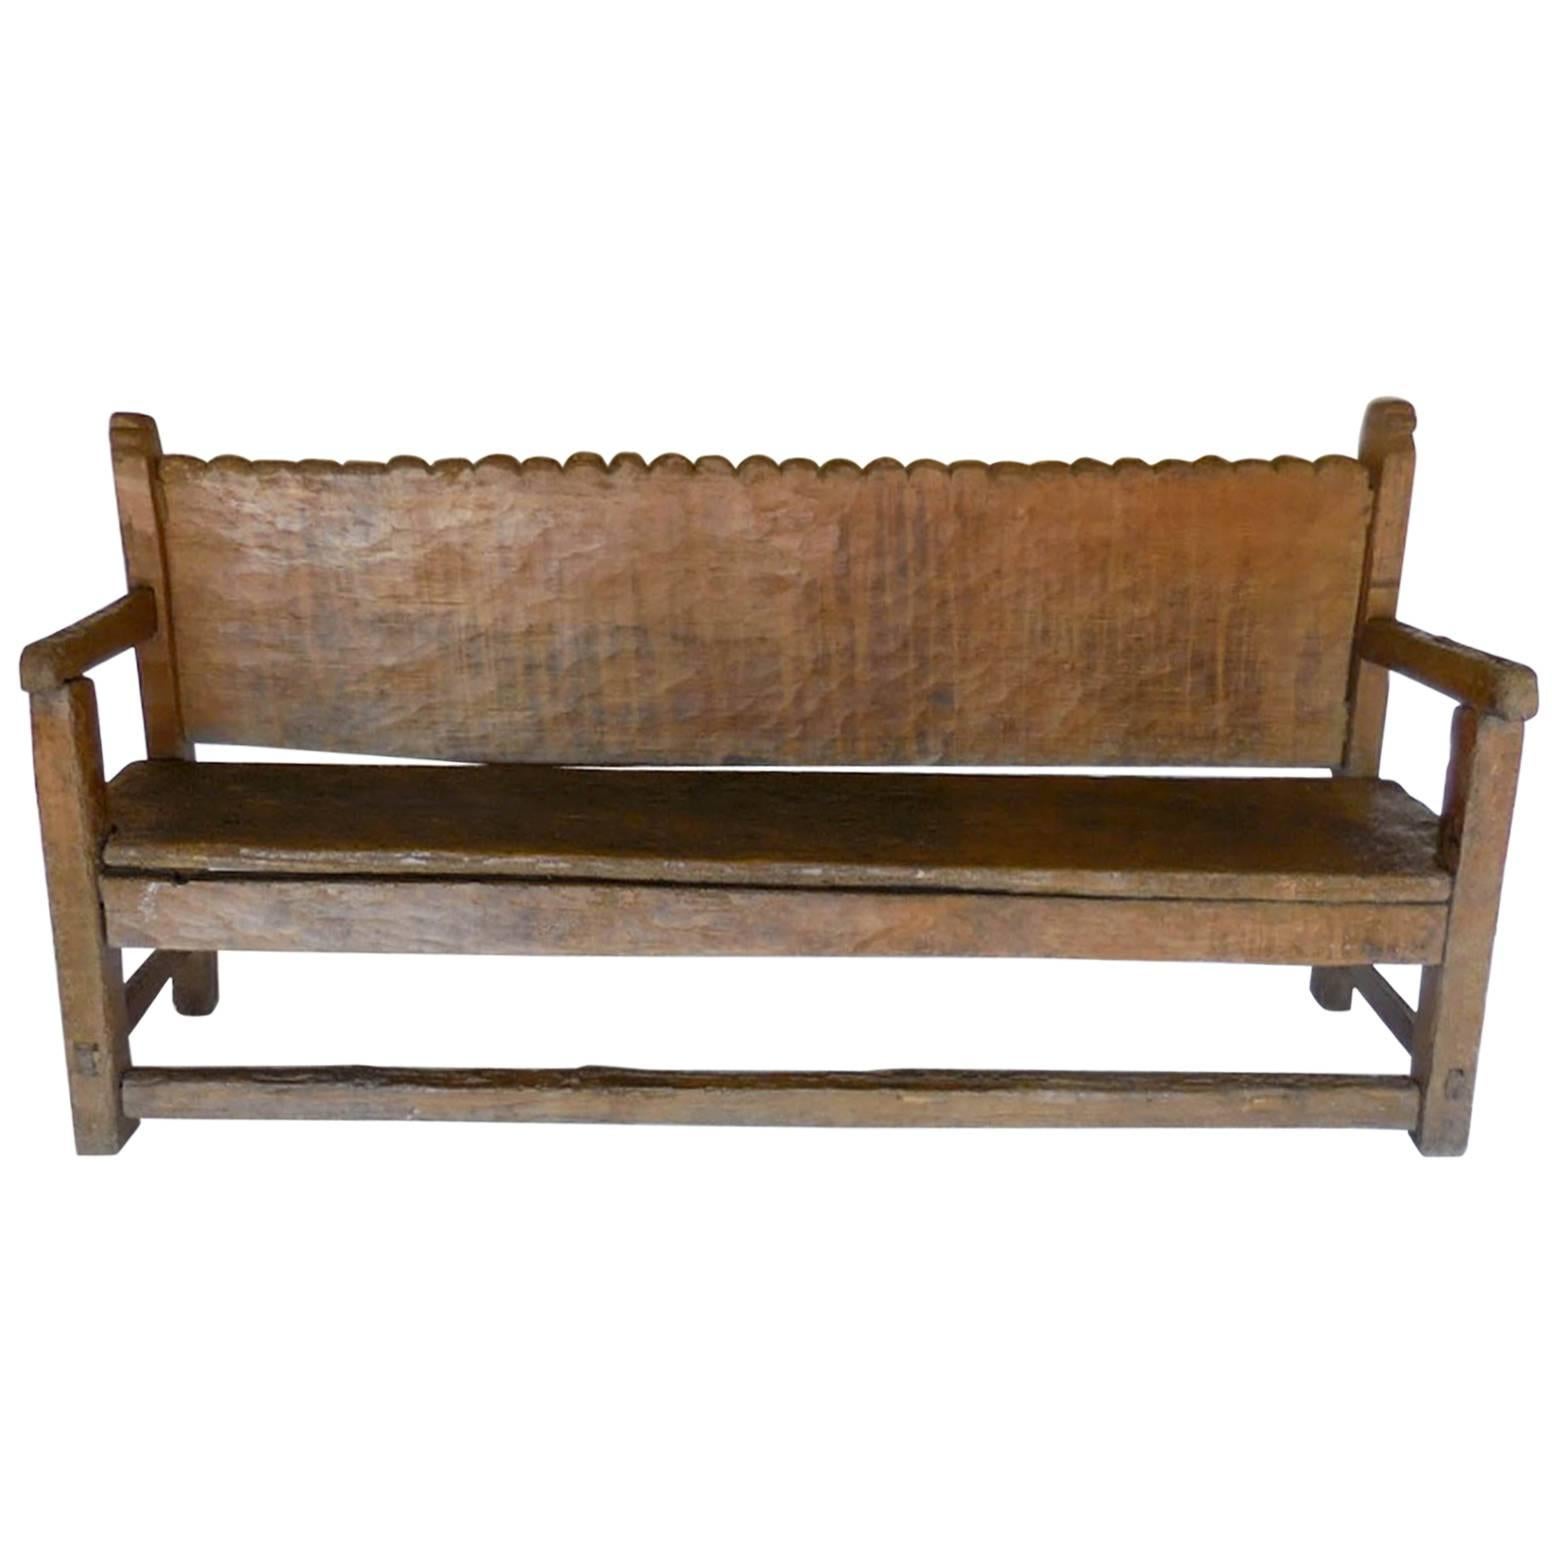 19th Century Rustic Scalloped Back Bench